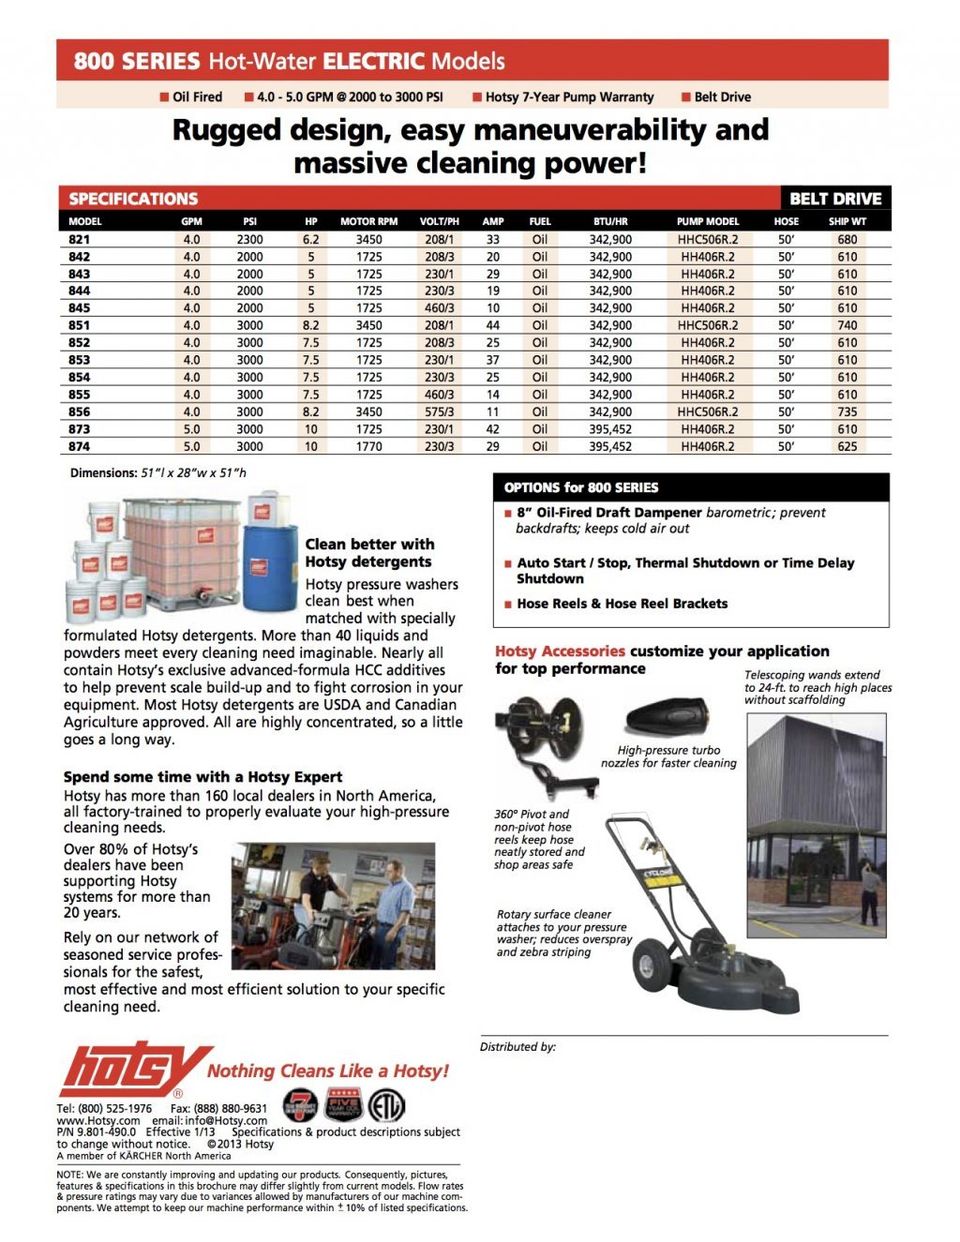 Hotsy Hot Water Pressure Washer 800 Series Product Sheet -- Page 2